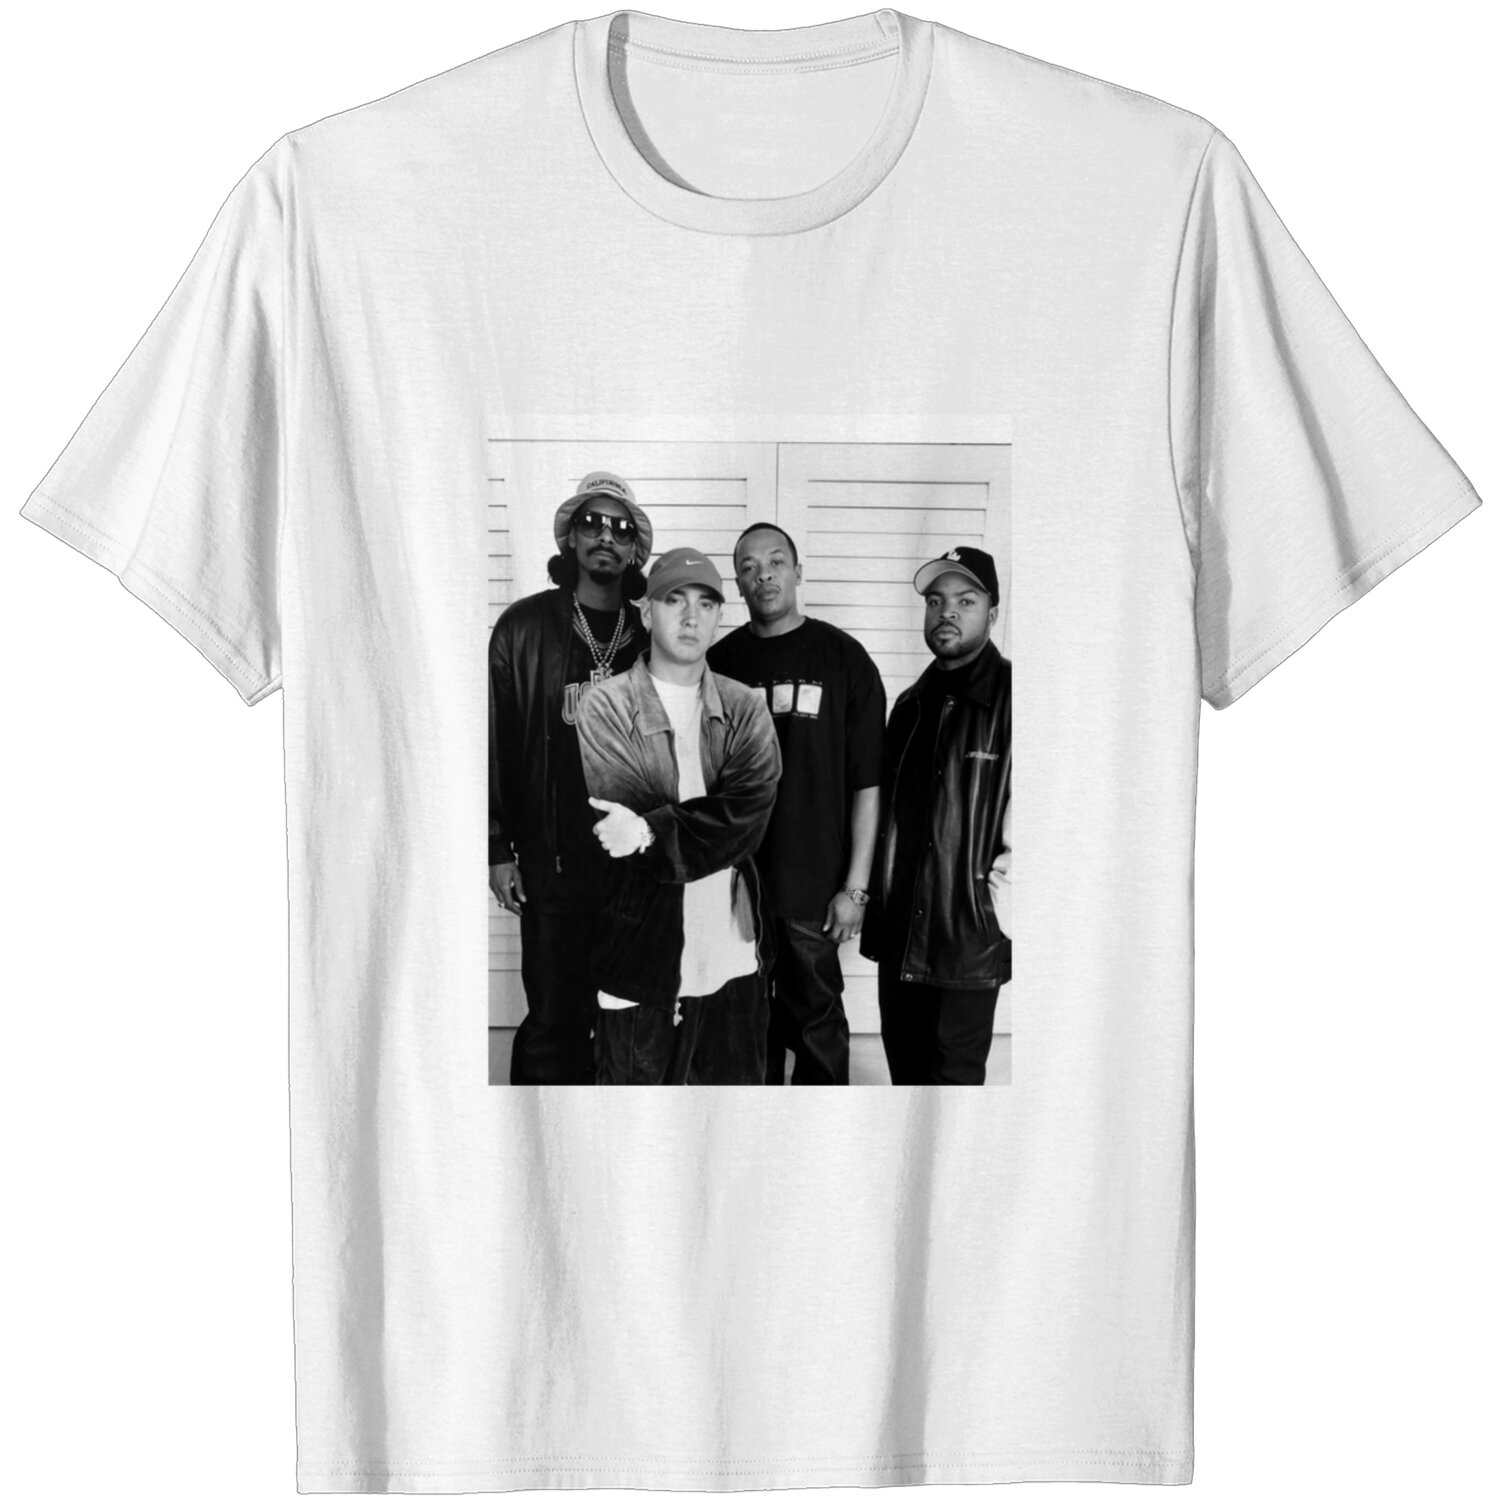 Legends of Hip Hop Vintage Graphic Tee featuring Eminem, Dr. Dre, Ice Cube, and Snoop Dogg DZT